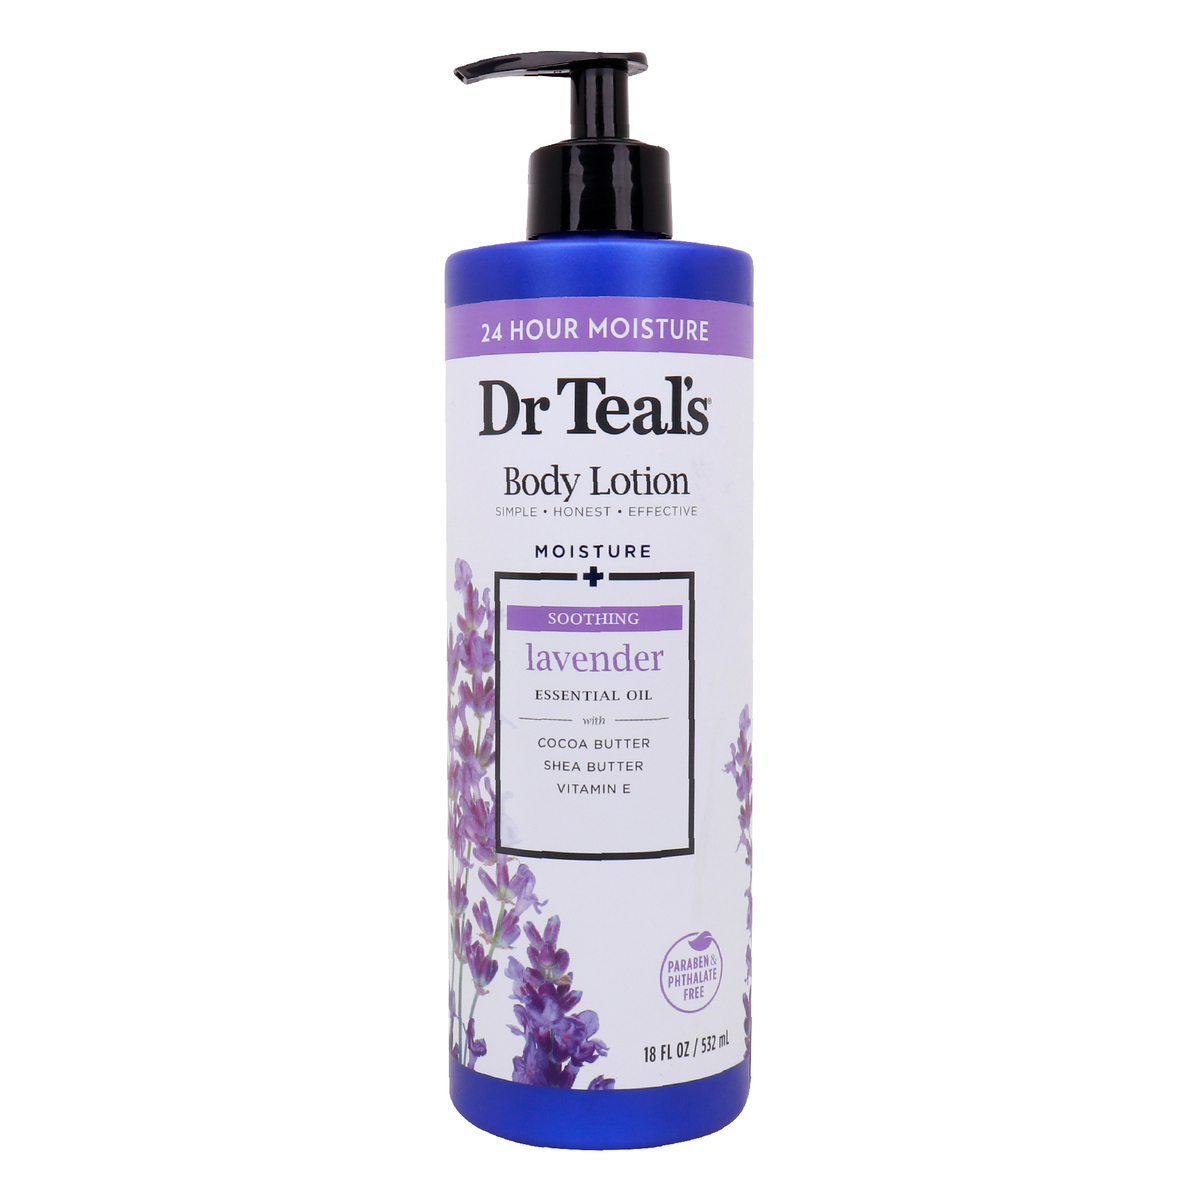 Dr Teal's Moisture + Soothing Body Lotion E 532 ml